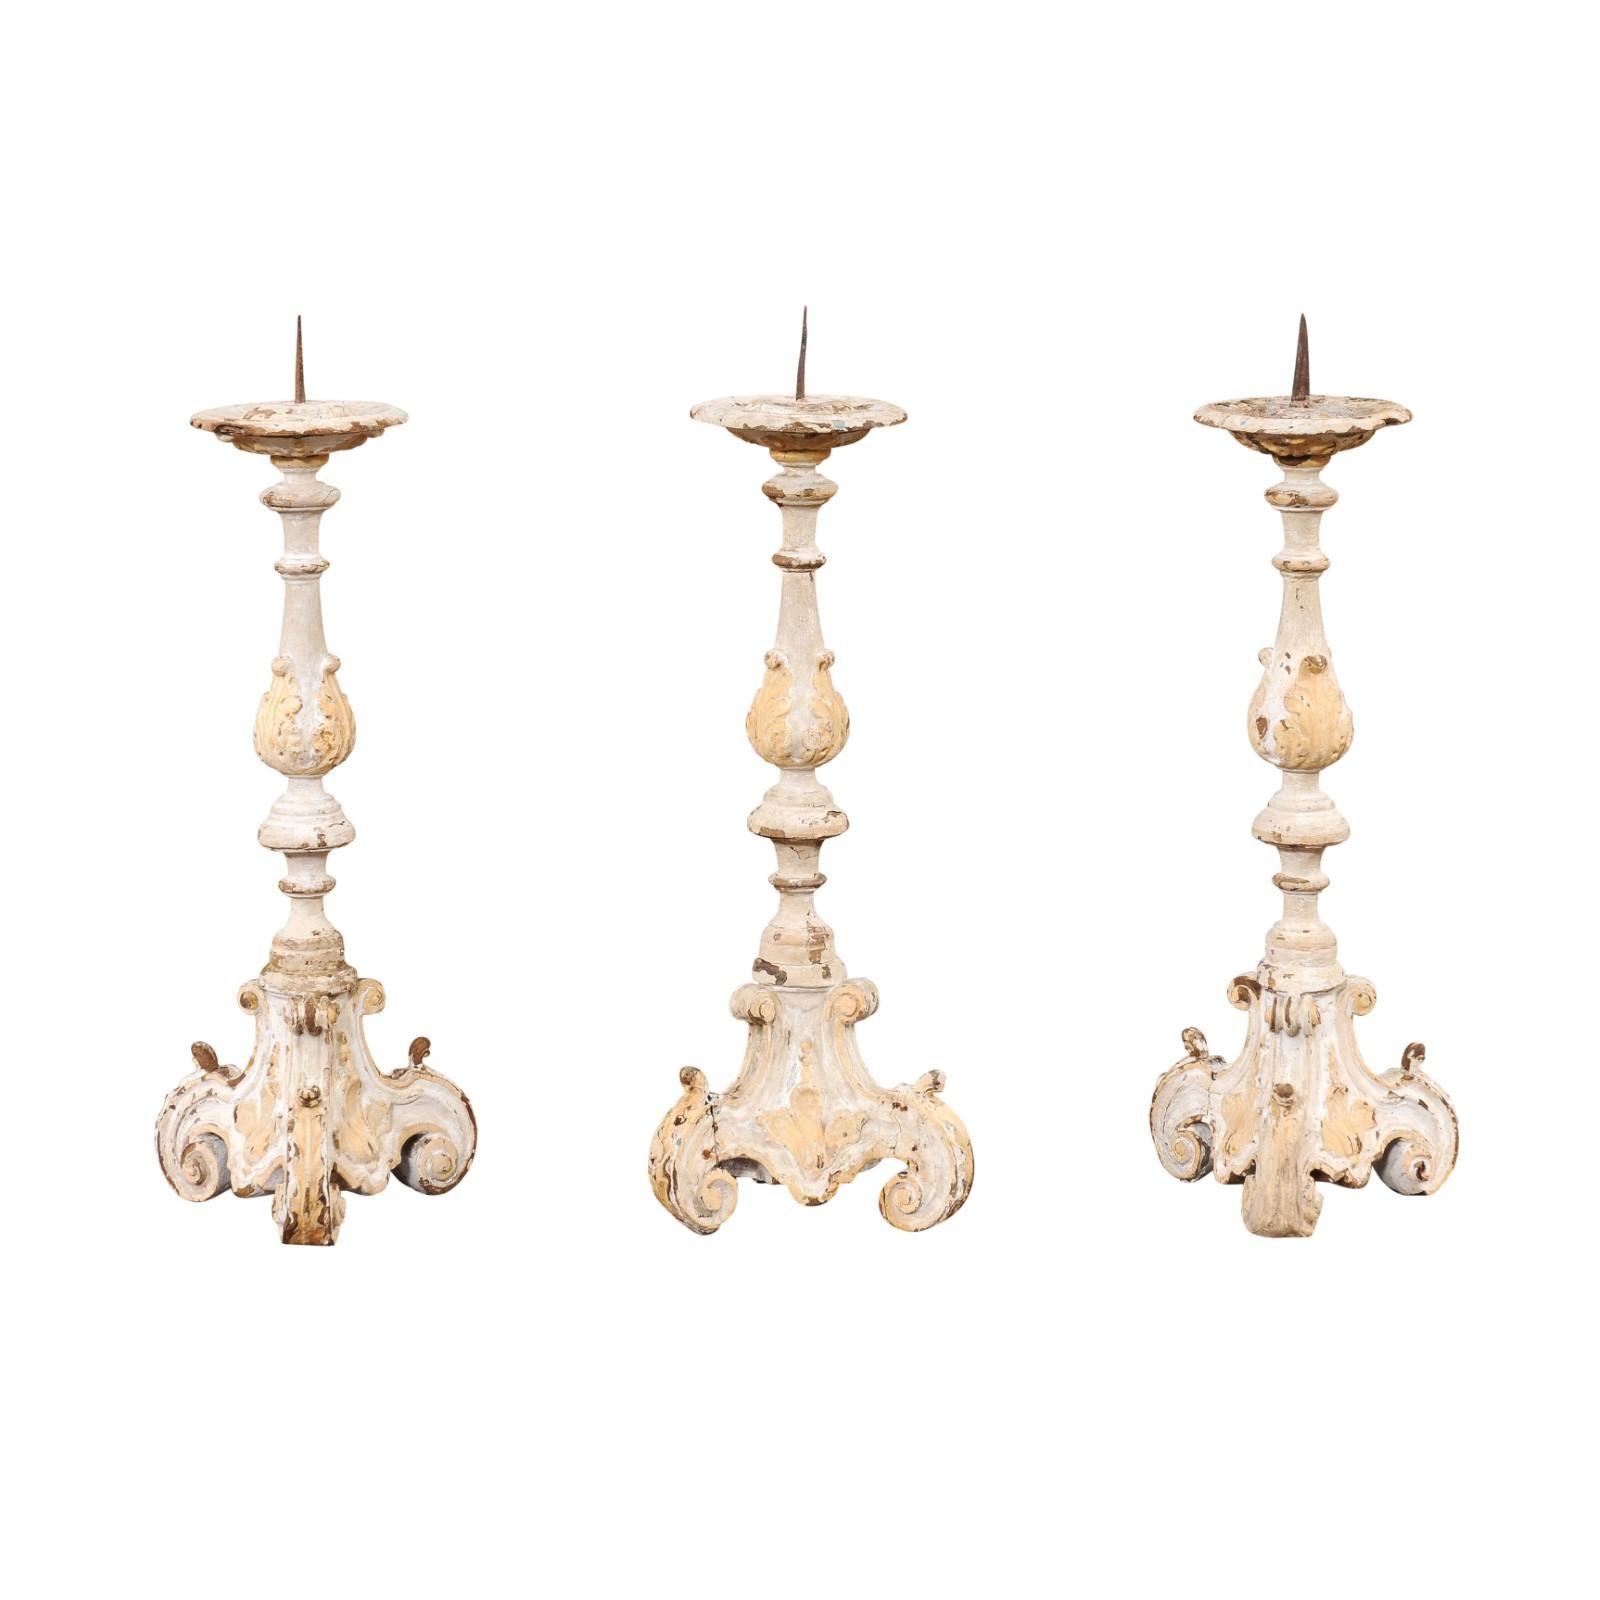 French Rococo period early 18th century two tone light gray and cream painted candlesticks, with authentic patina, priced and sold each. Discover the allure of the French Rococo period with these early 18th-century candlesticks, each presenting a